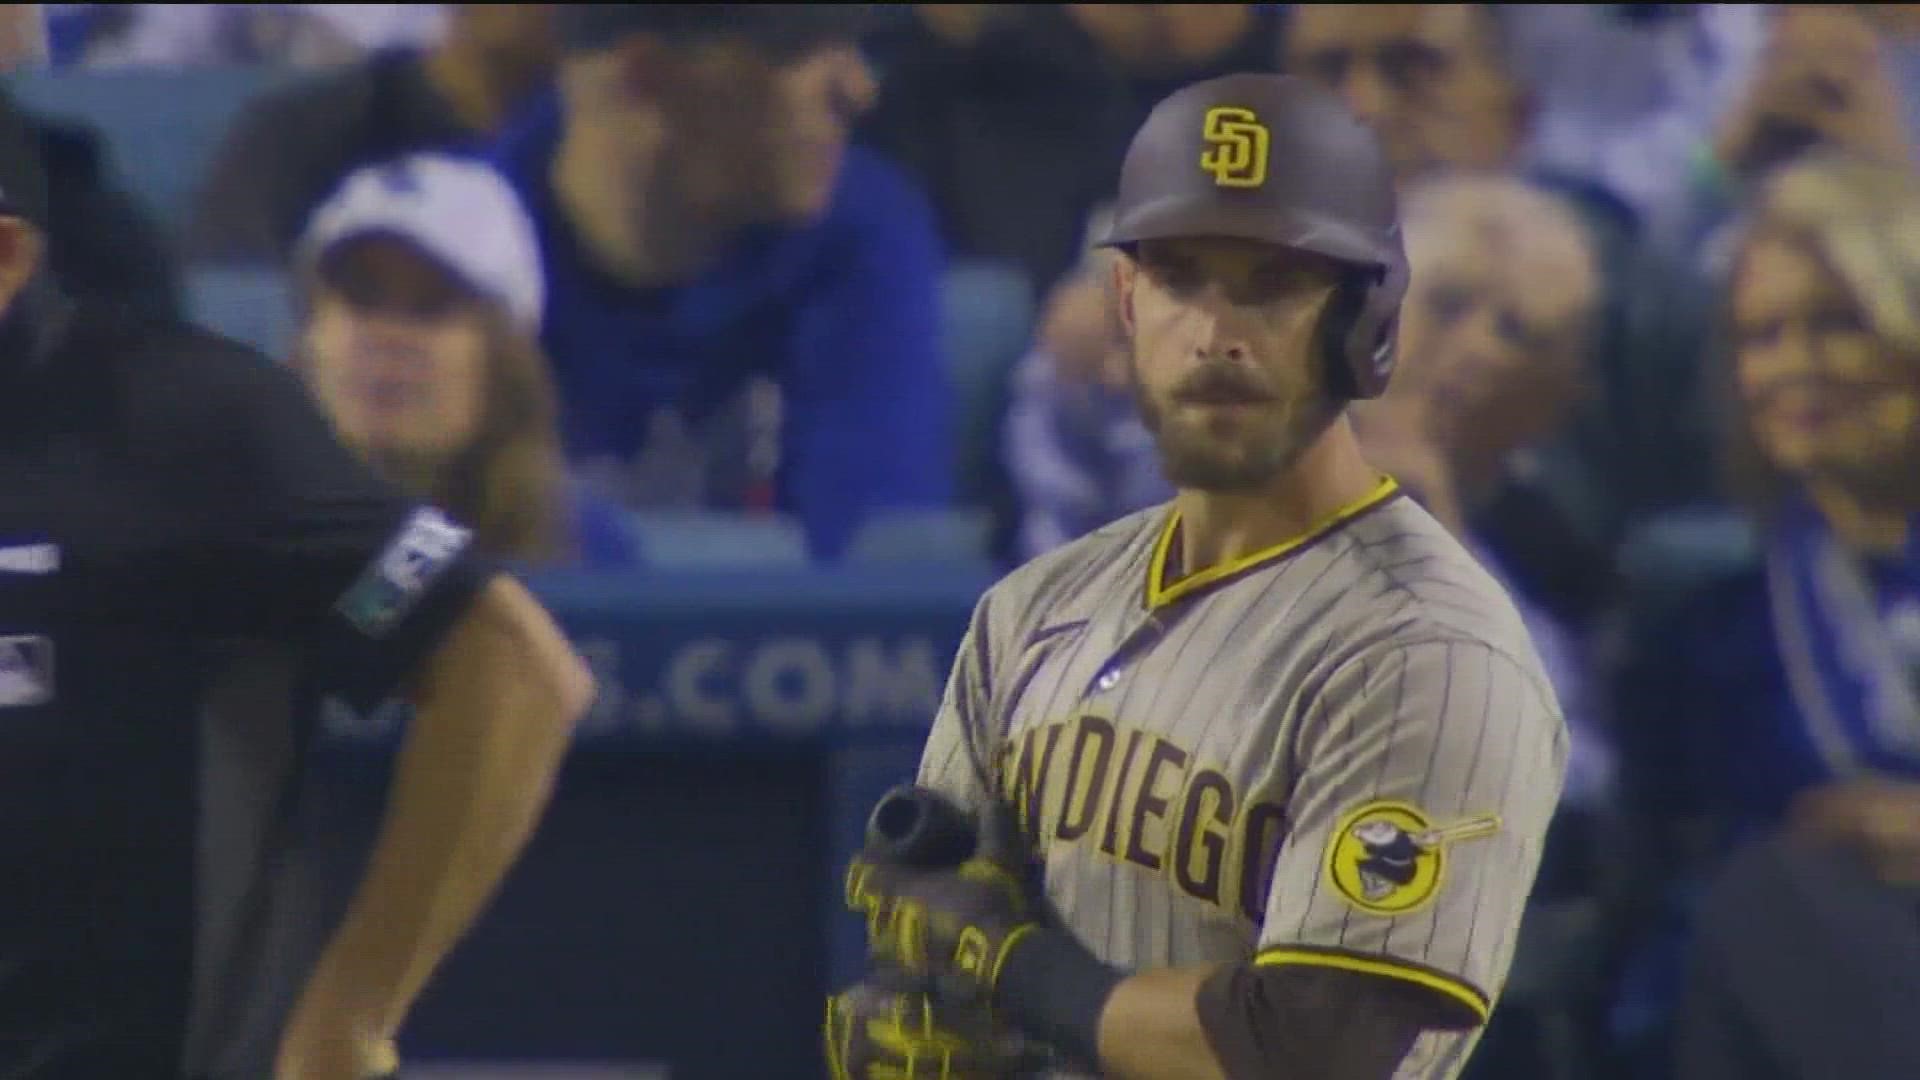 NLDS: Padres Beat Dodgers in San Diego to Take 2-1 Series Lead